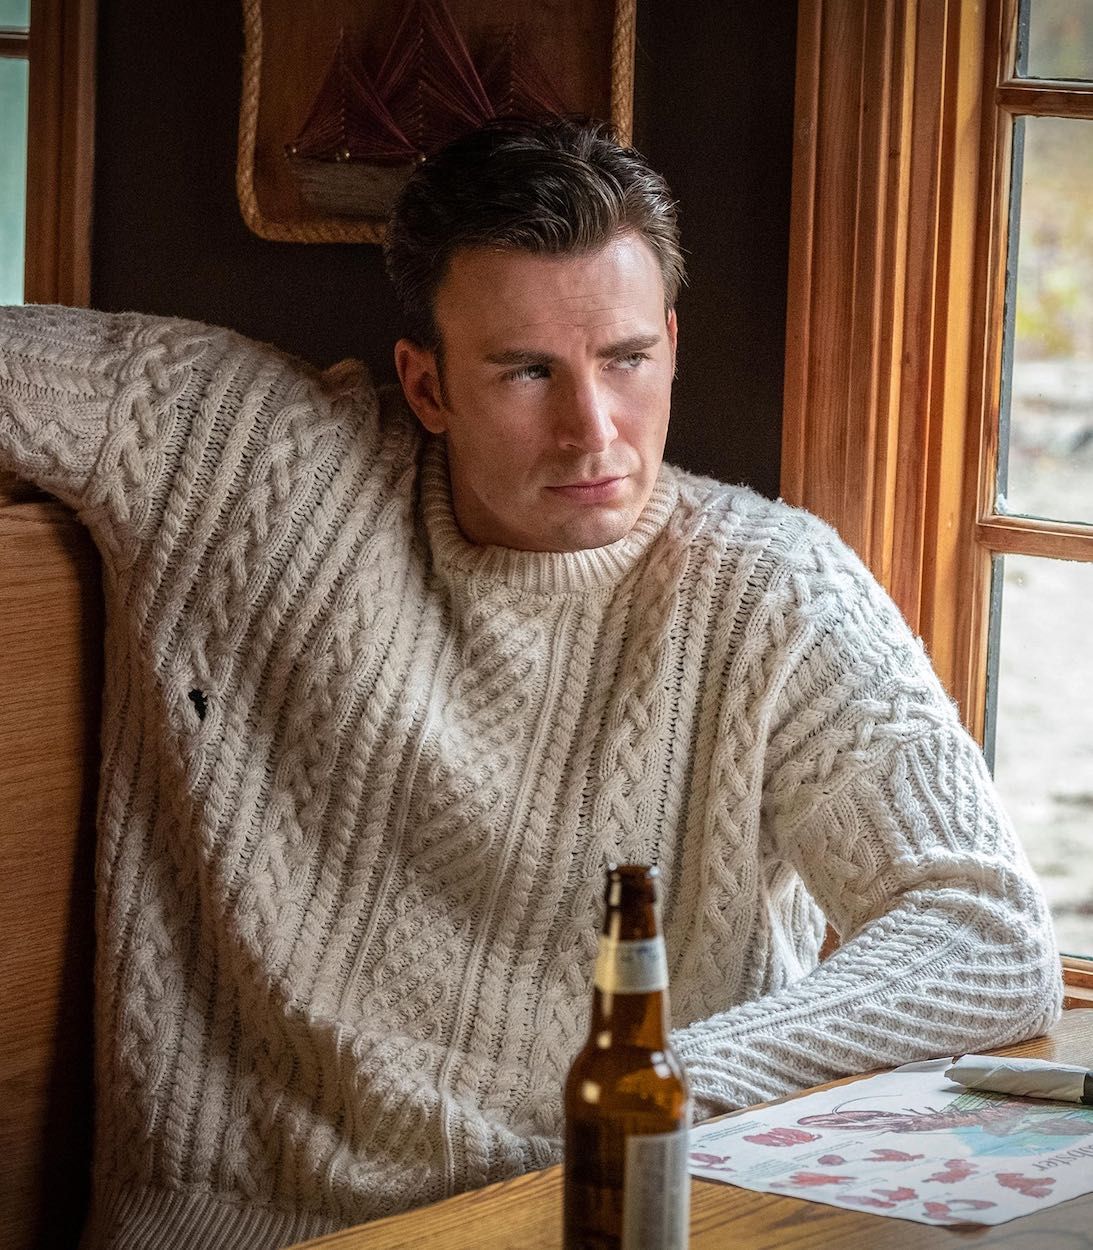 Chris Evans as Ransom Drysdale in Knives Out